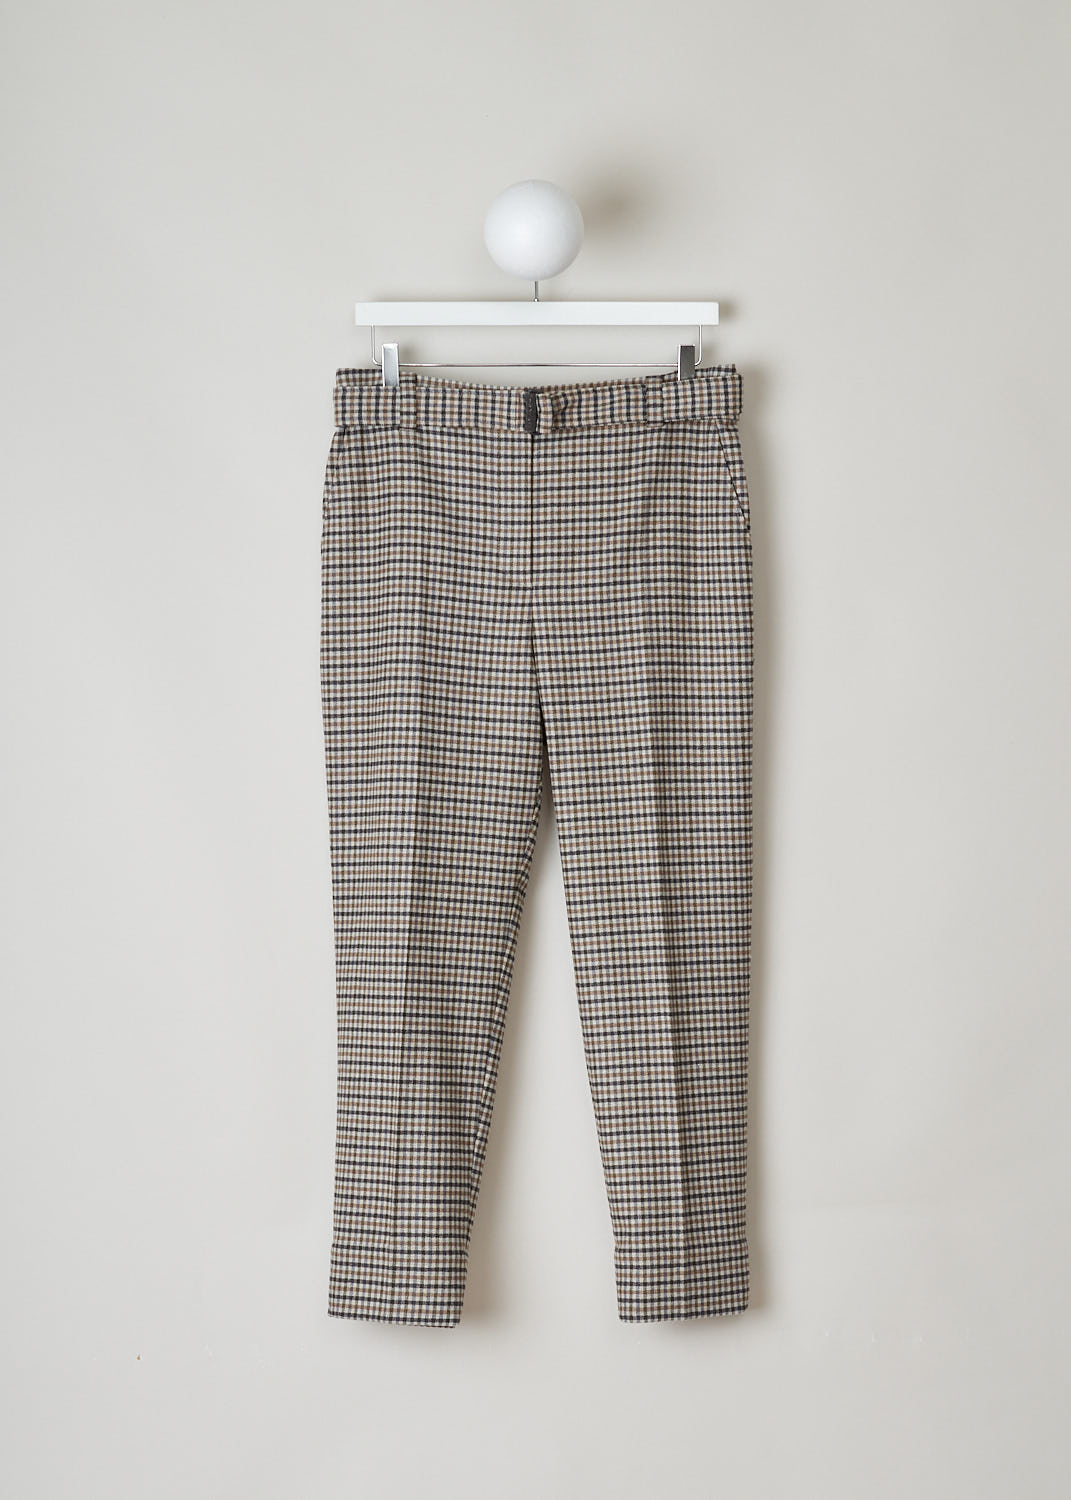 BRUNELLO CUCINELLI, BROWN WOOL CHECKED PANTS, MB584P7487_C017, Brown, Print, Front, These brown checkered pants have a waistband with belt loops. These pants come with a monili beaded D-ring belt made in the same fabric. A concealed clasp and zipper function as the closure option. Slanted pockets can be found in the front and welt pockets in the back. A centre crease runs along the length of the tapered pant legs. 
